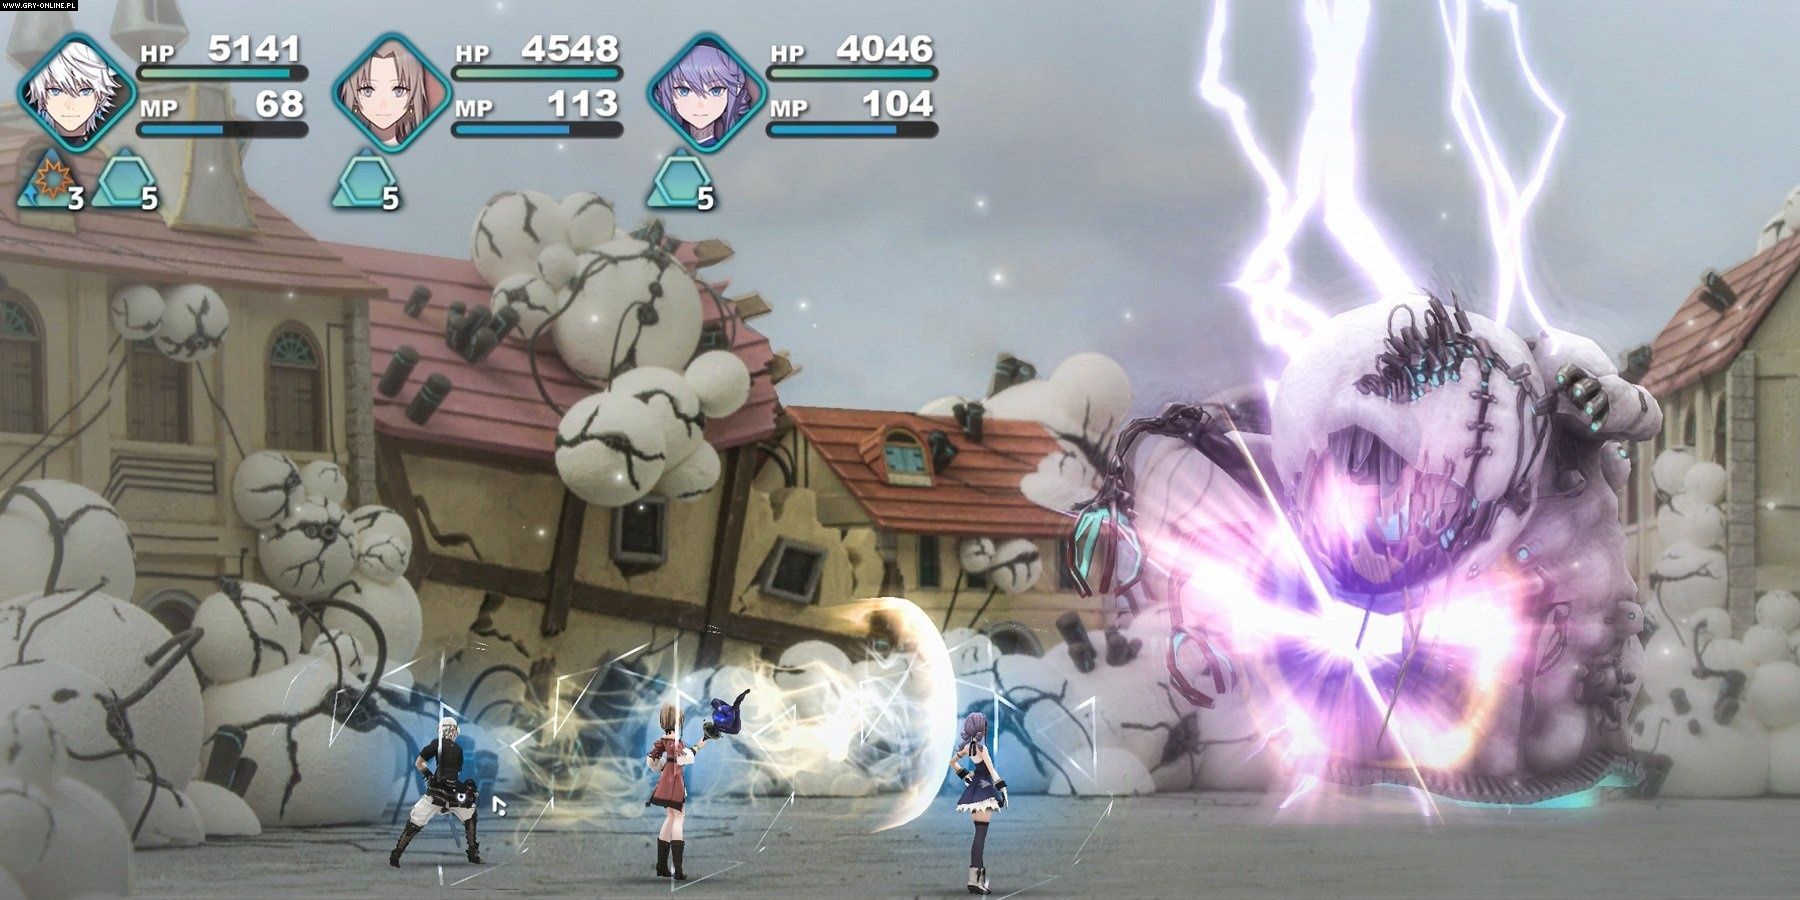 A screenshot showing gameplay in Fantasian where the characters fight an enemy